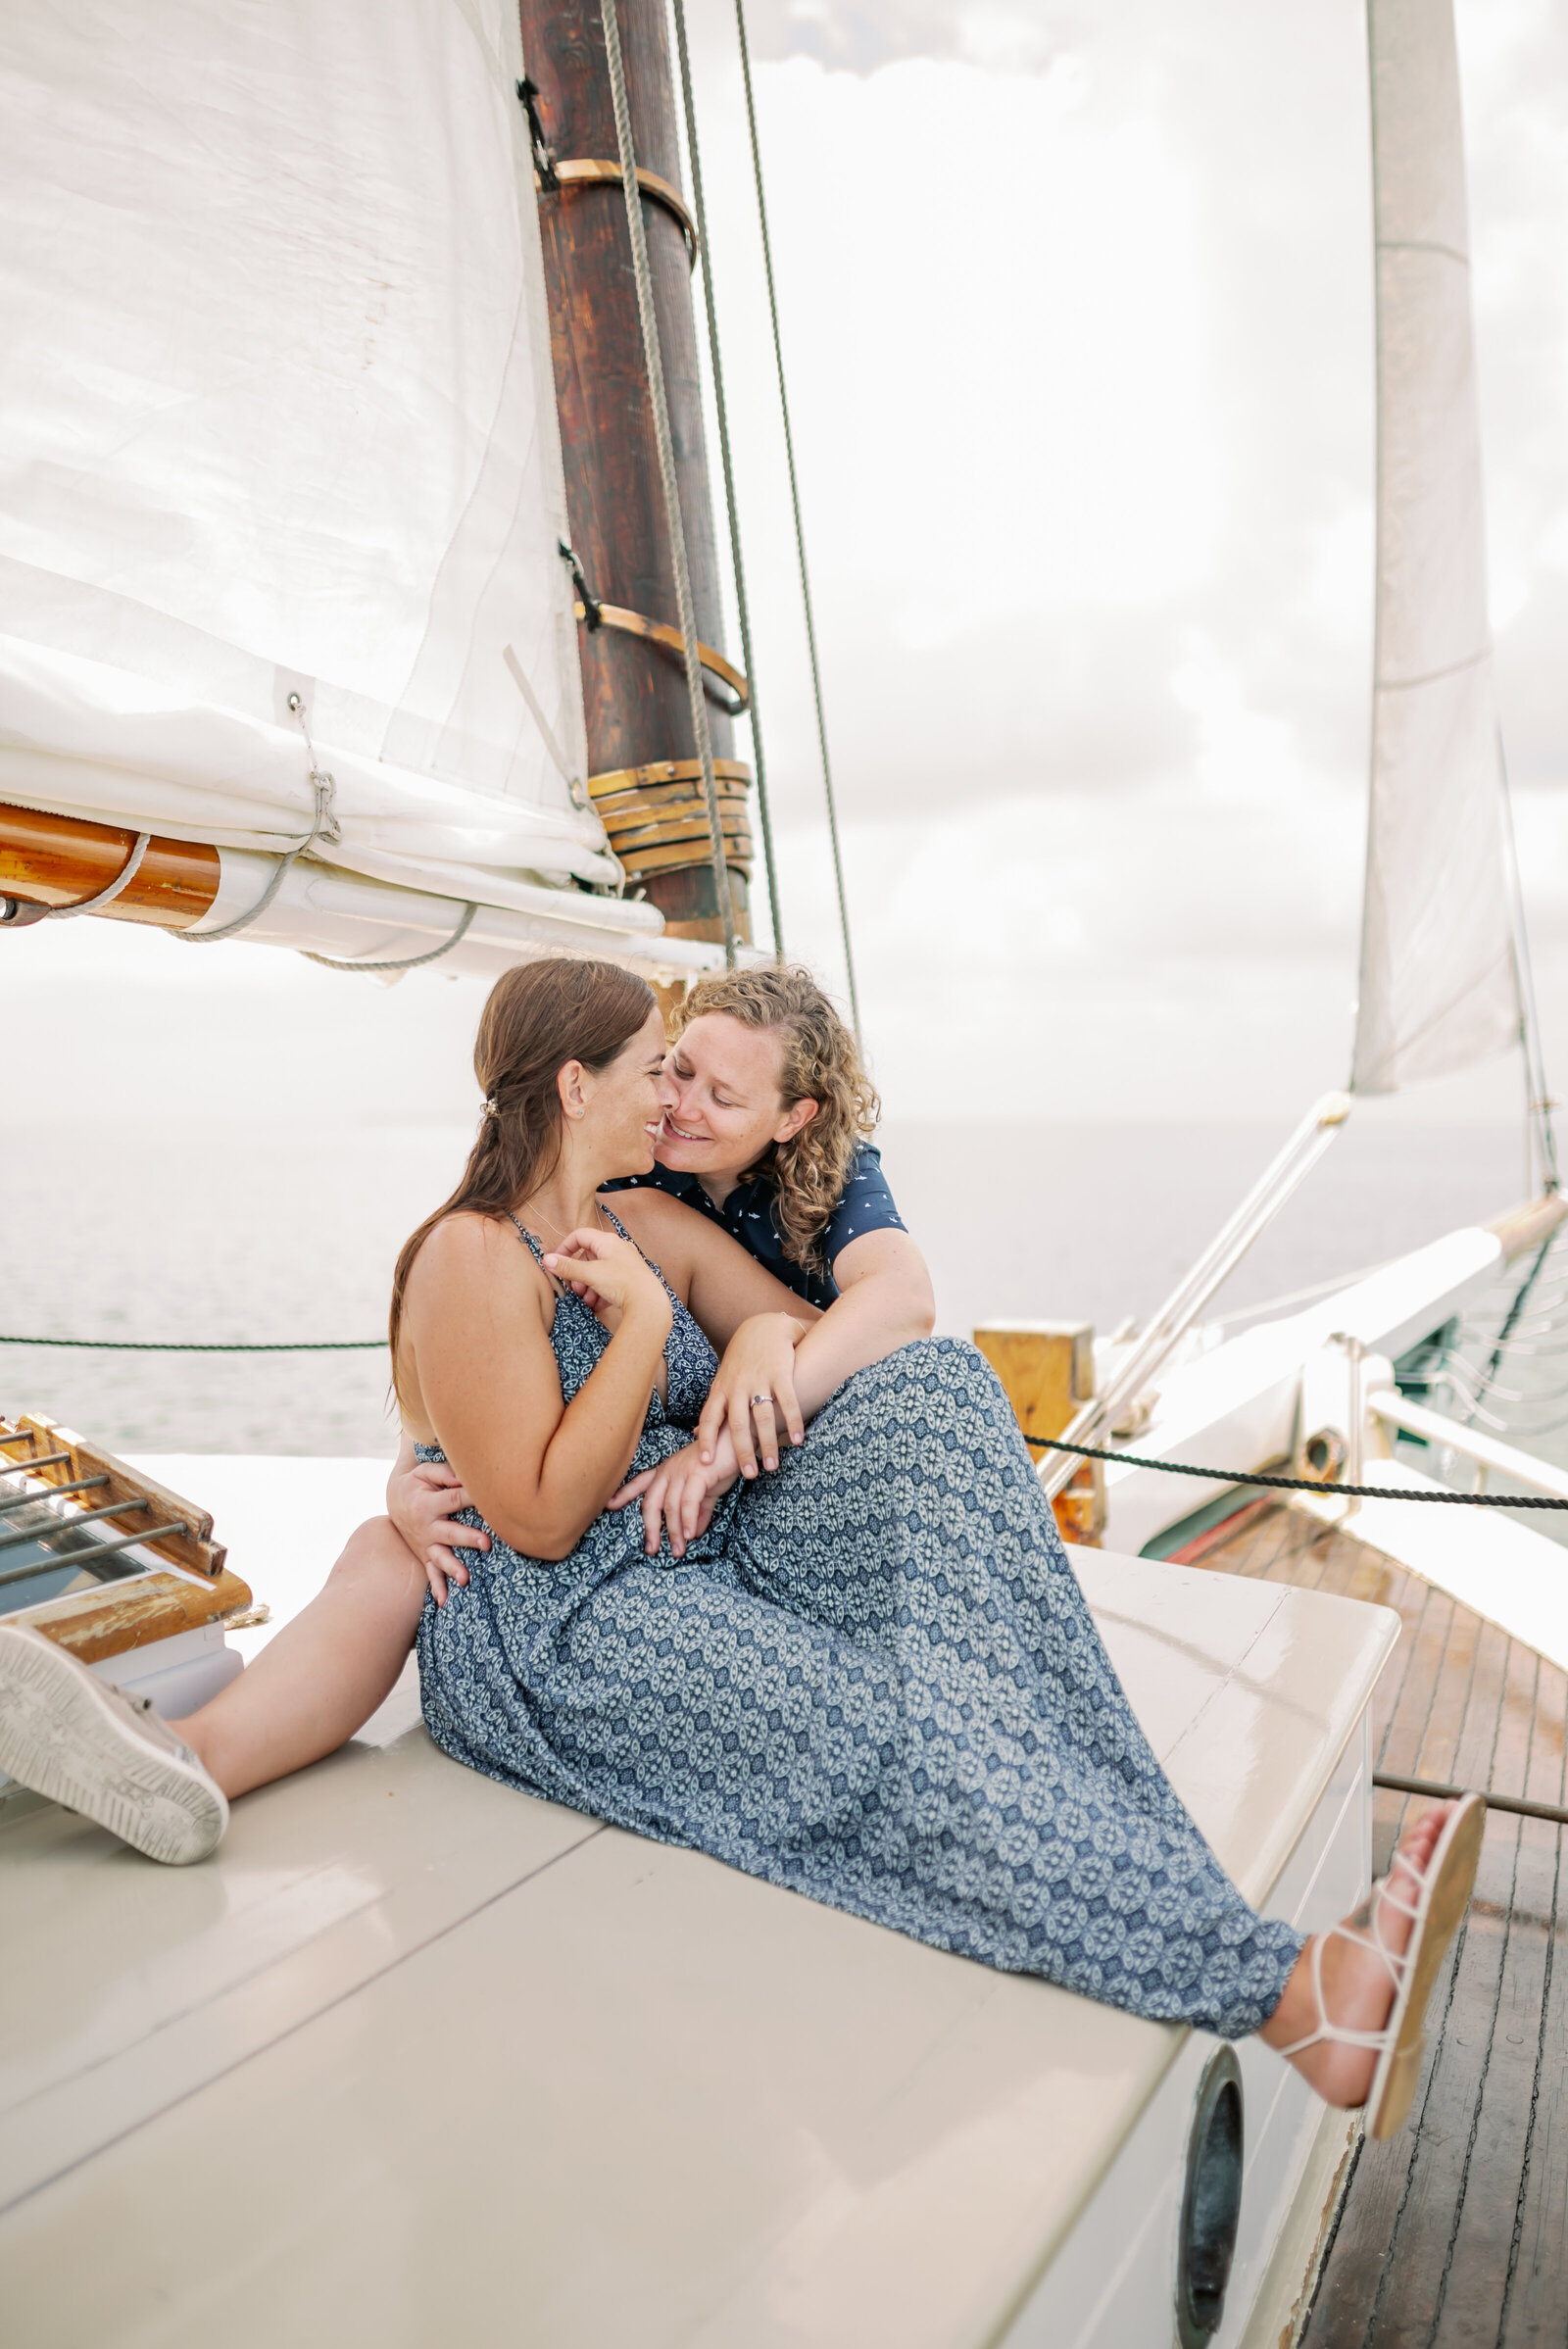 engaged lesbian couple sitting together on a sailboat about to share a kiss